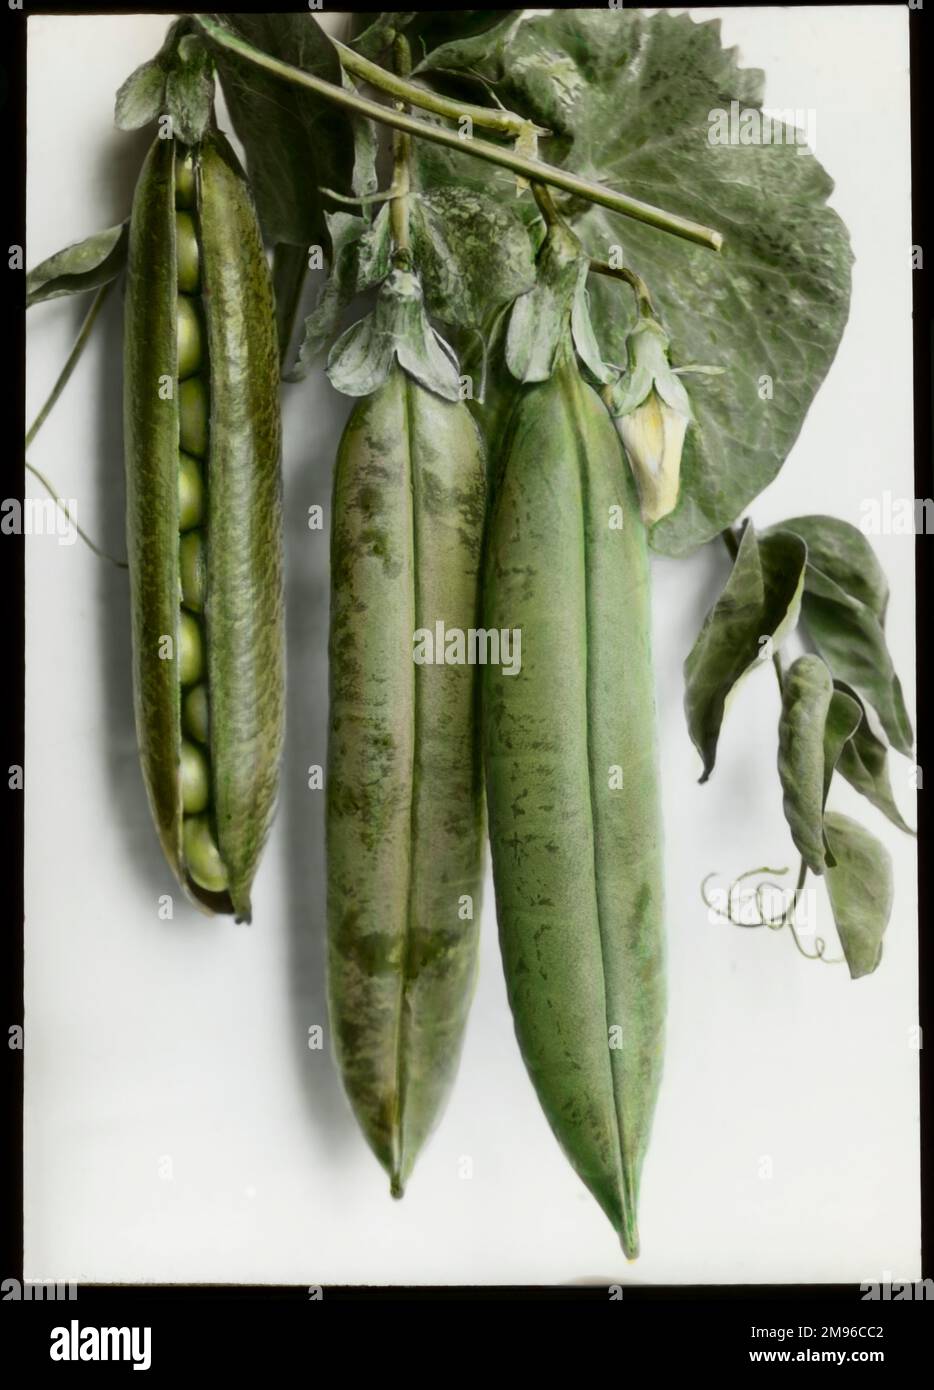 Pisum sativum (Pea) 'Pioneer', a vegetable of the Fabaceae family, showing three pods, with the left-hand pod partially open to reveal the peas inside. Stock Photo